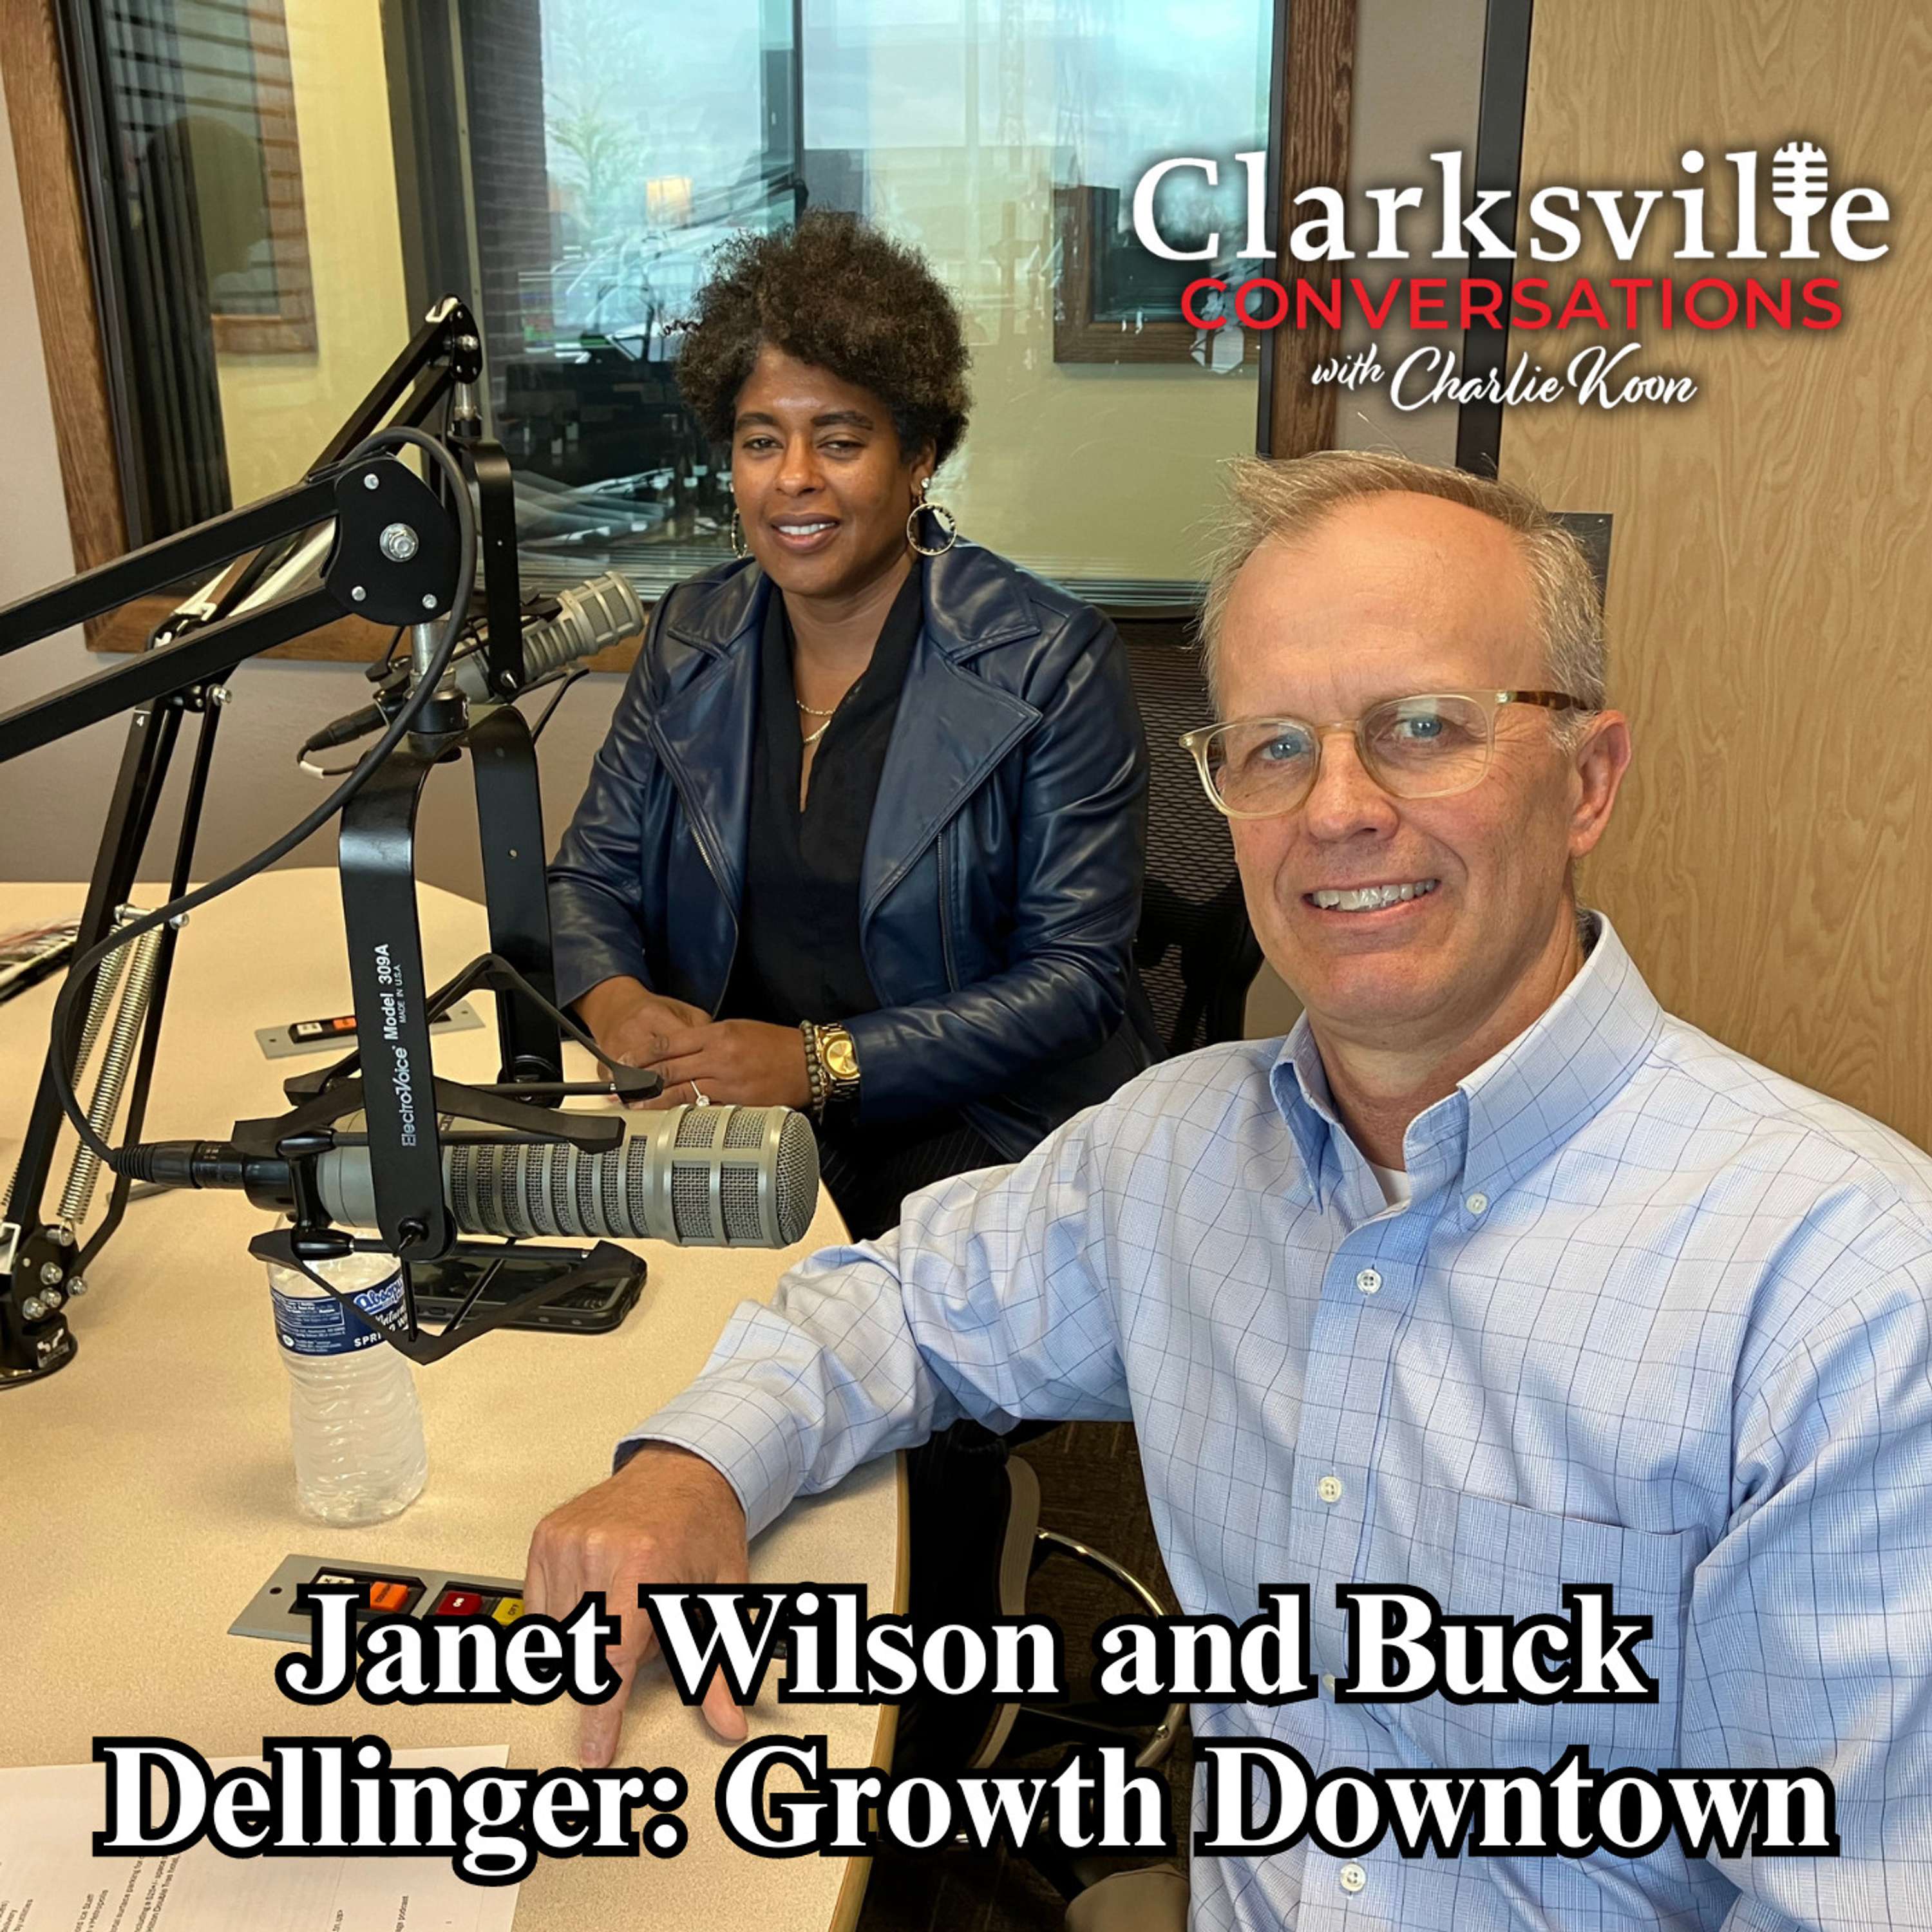 Janet Wilson and Buck Dellinger: Growth Downtown